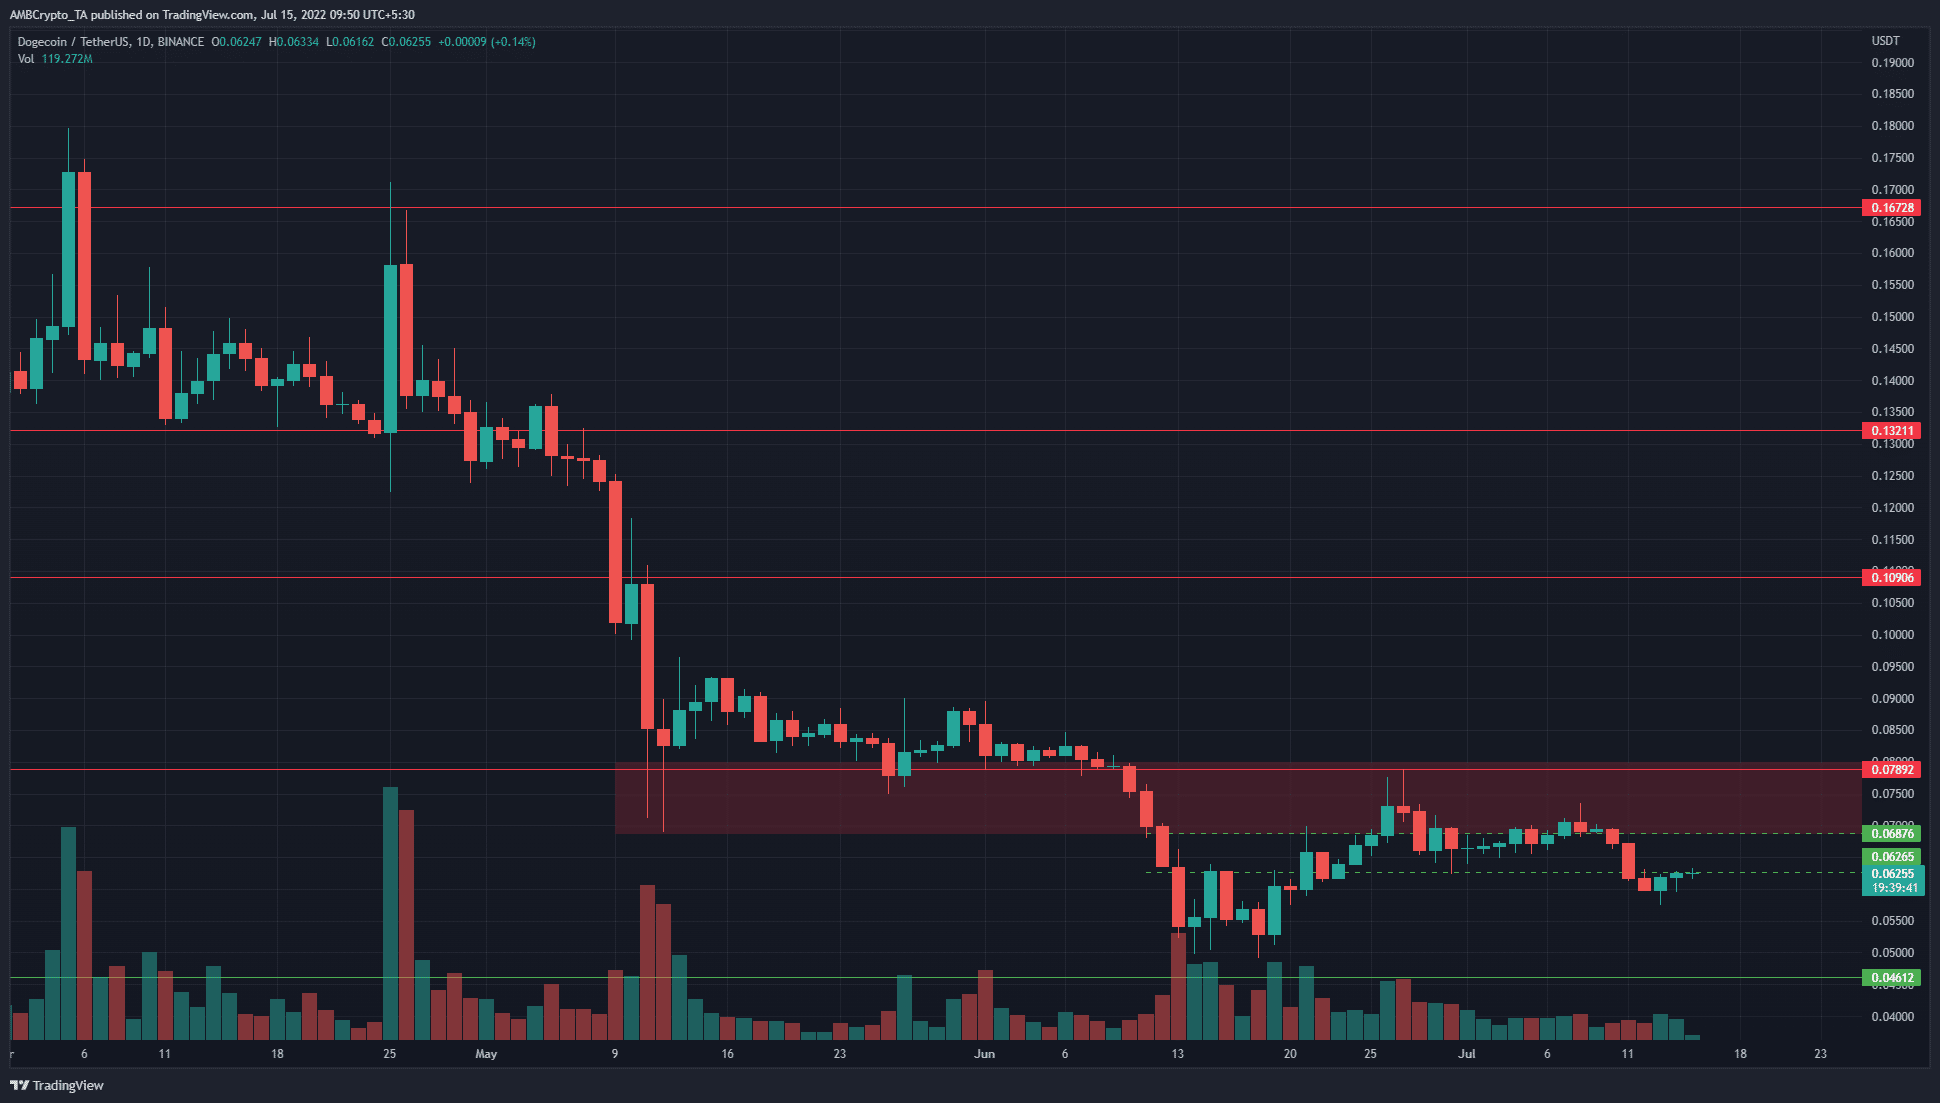 Dogecoin rejected at a supply zone, trend continued to favor the bears